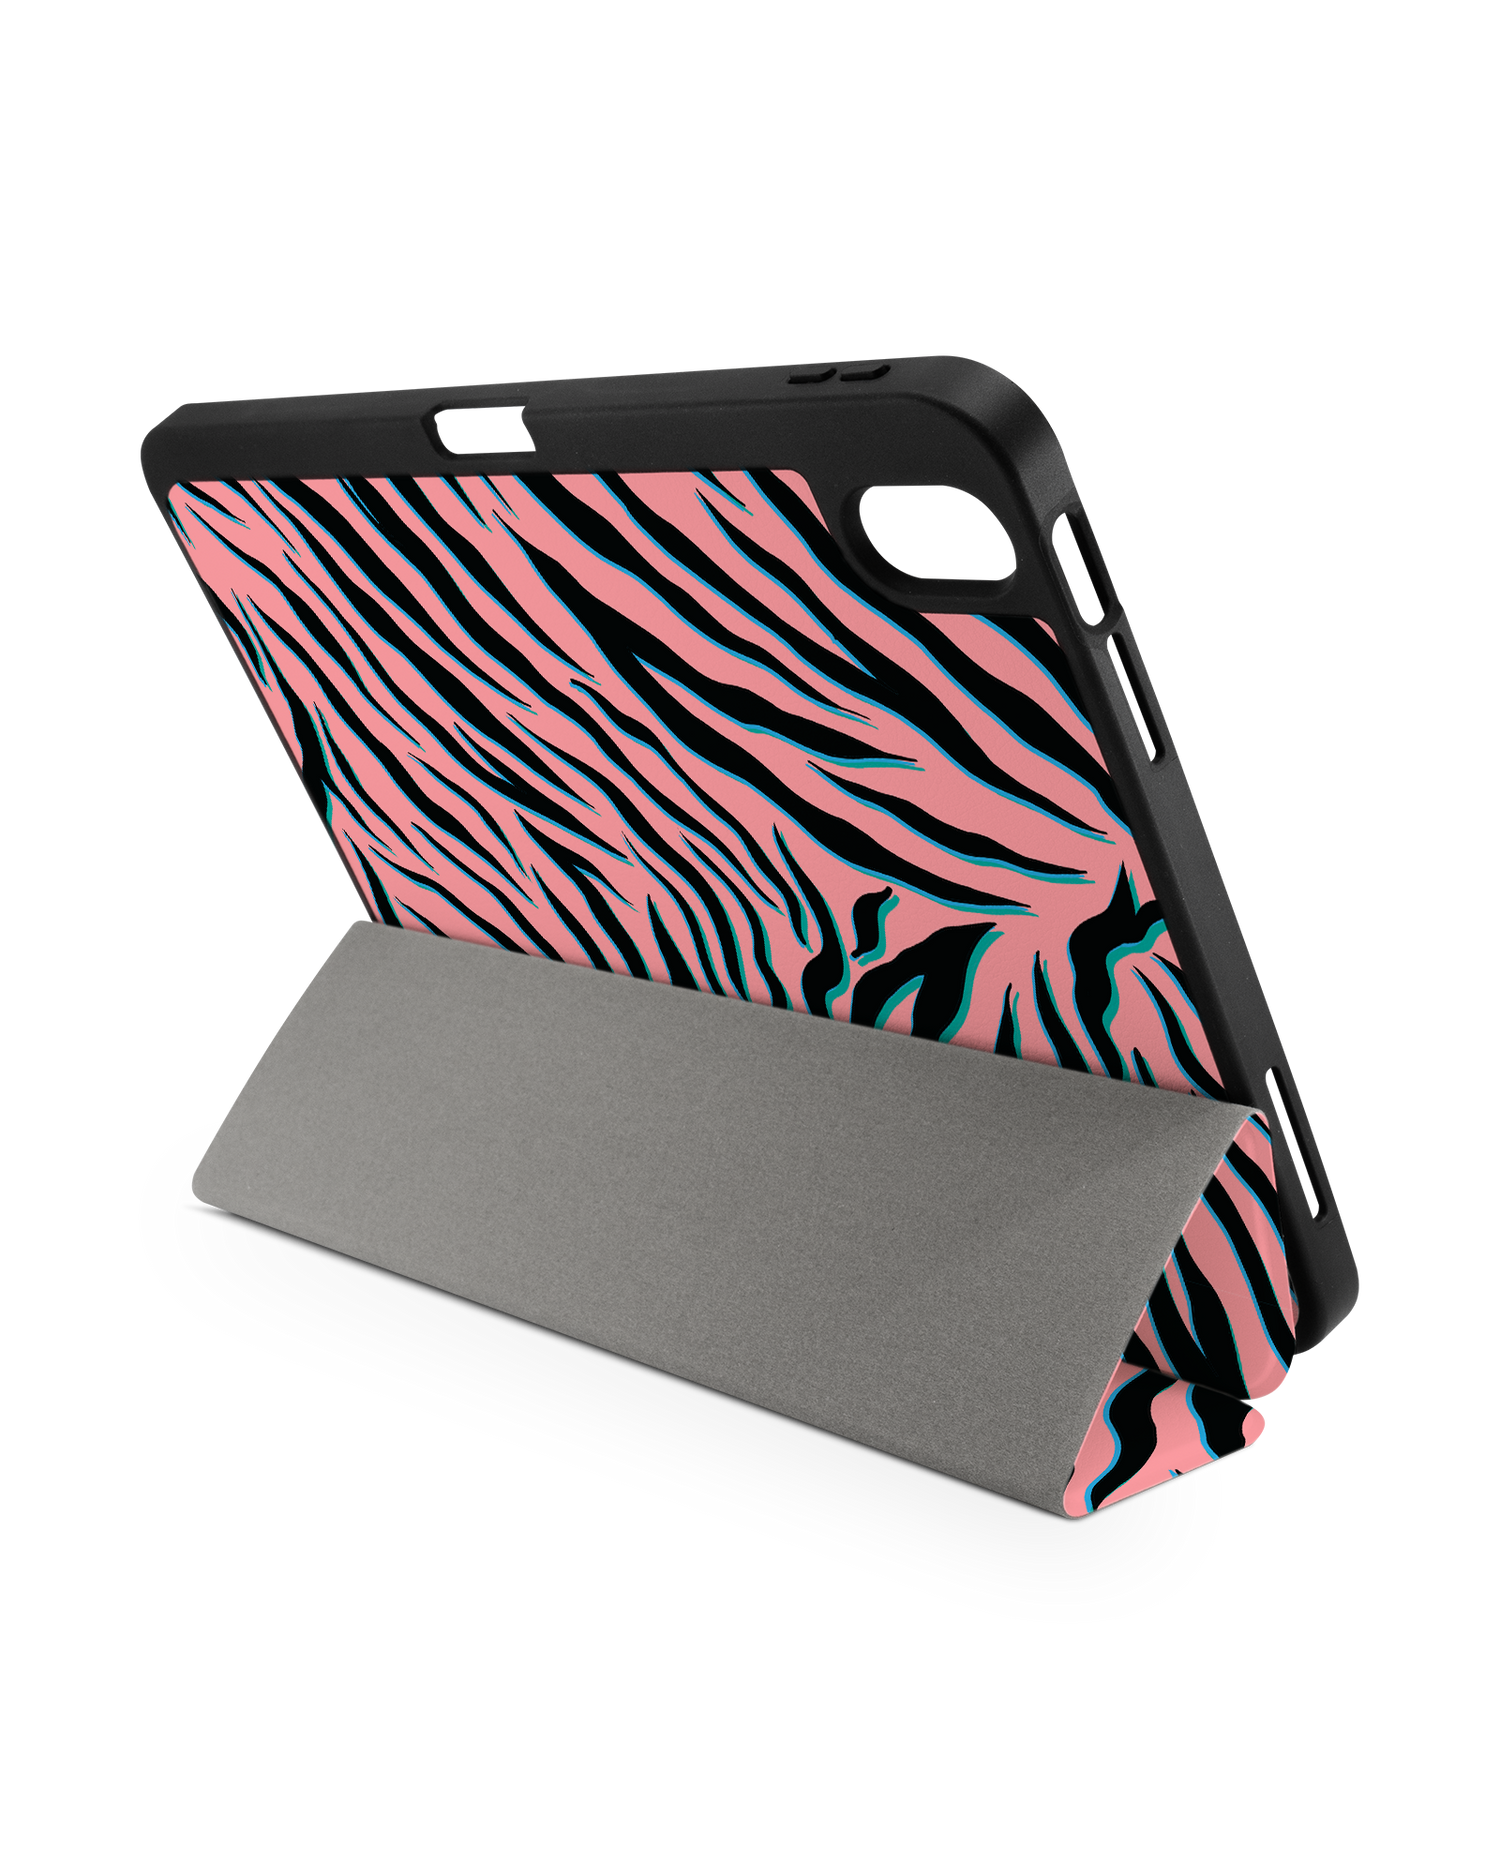 Pink Zebra iPad Case with Pencil Holder for Apple iPad (10th Generation): Set up in landscape format (back view)